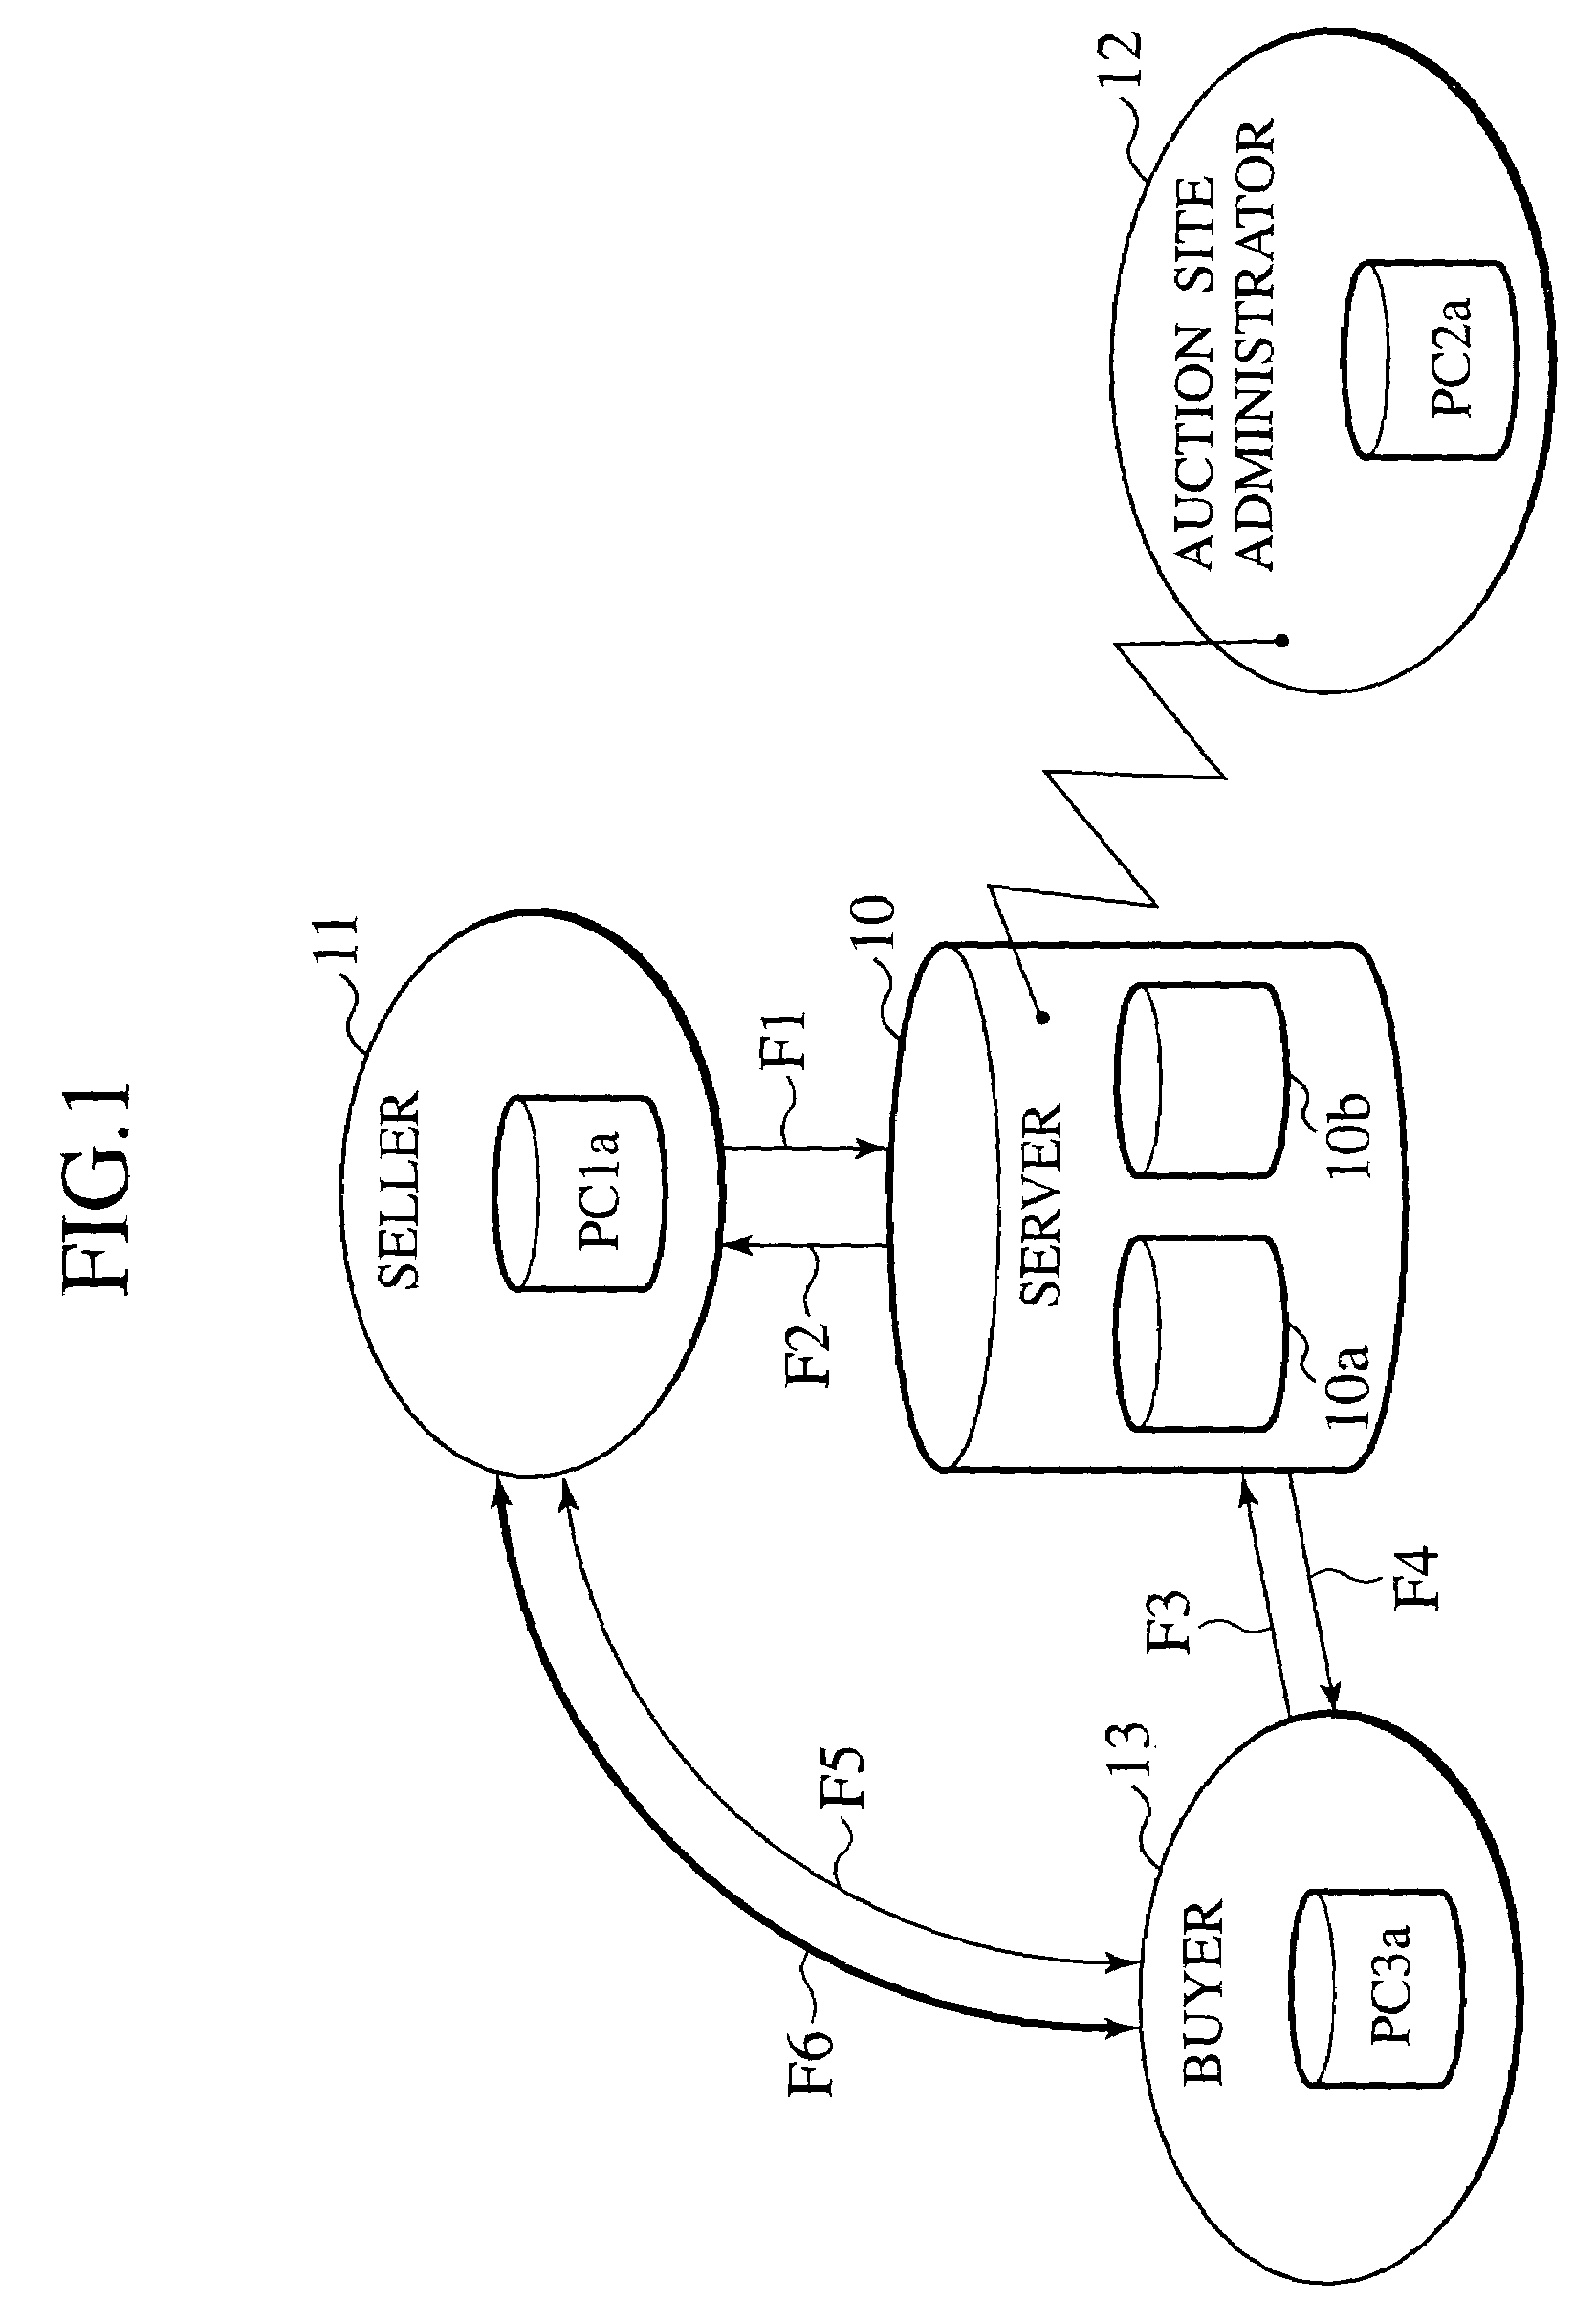 Method of electronic commerce including receiving an acceptance signal indicating a change in a transaction available period based on a time adjustment day